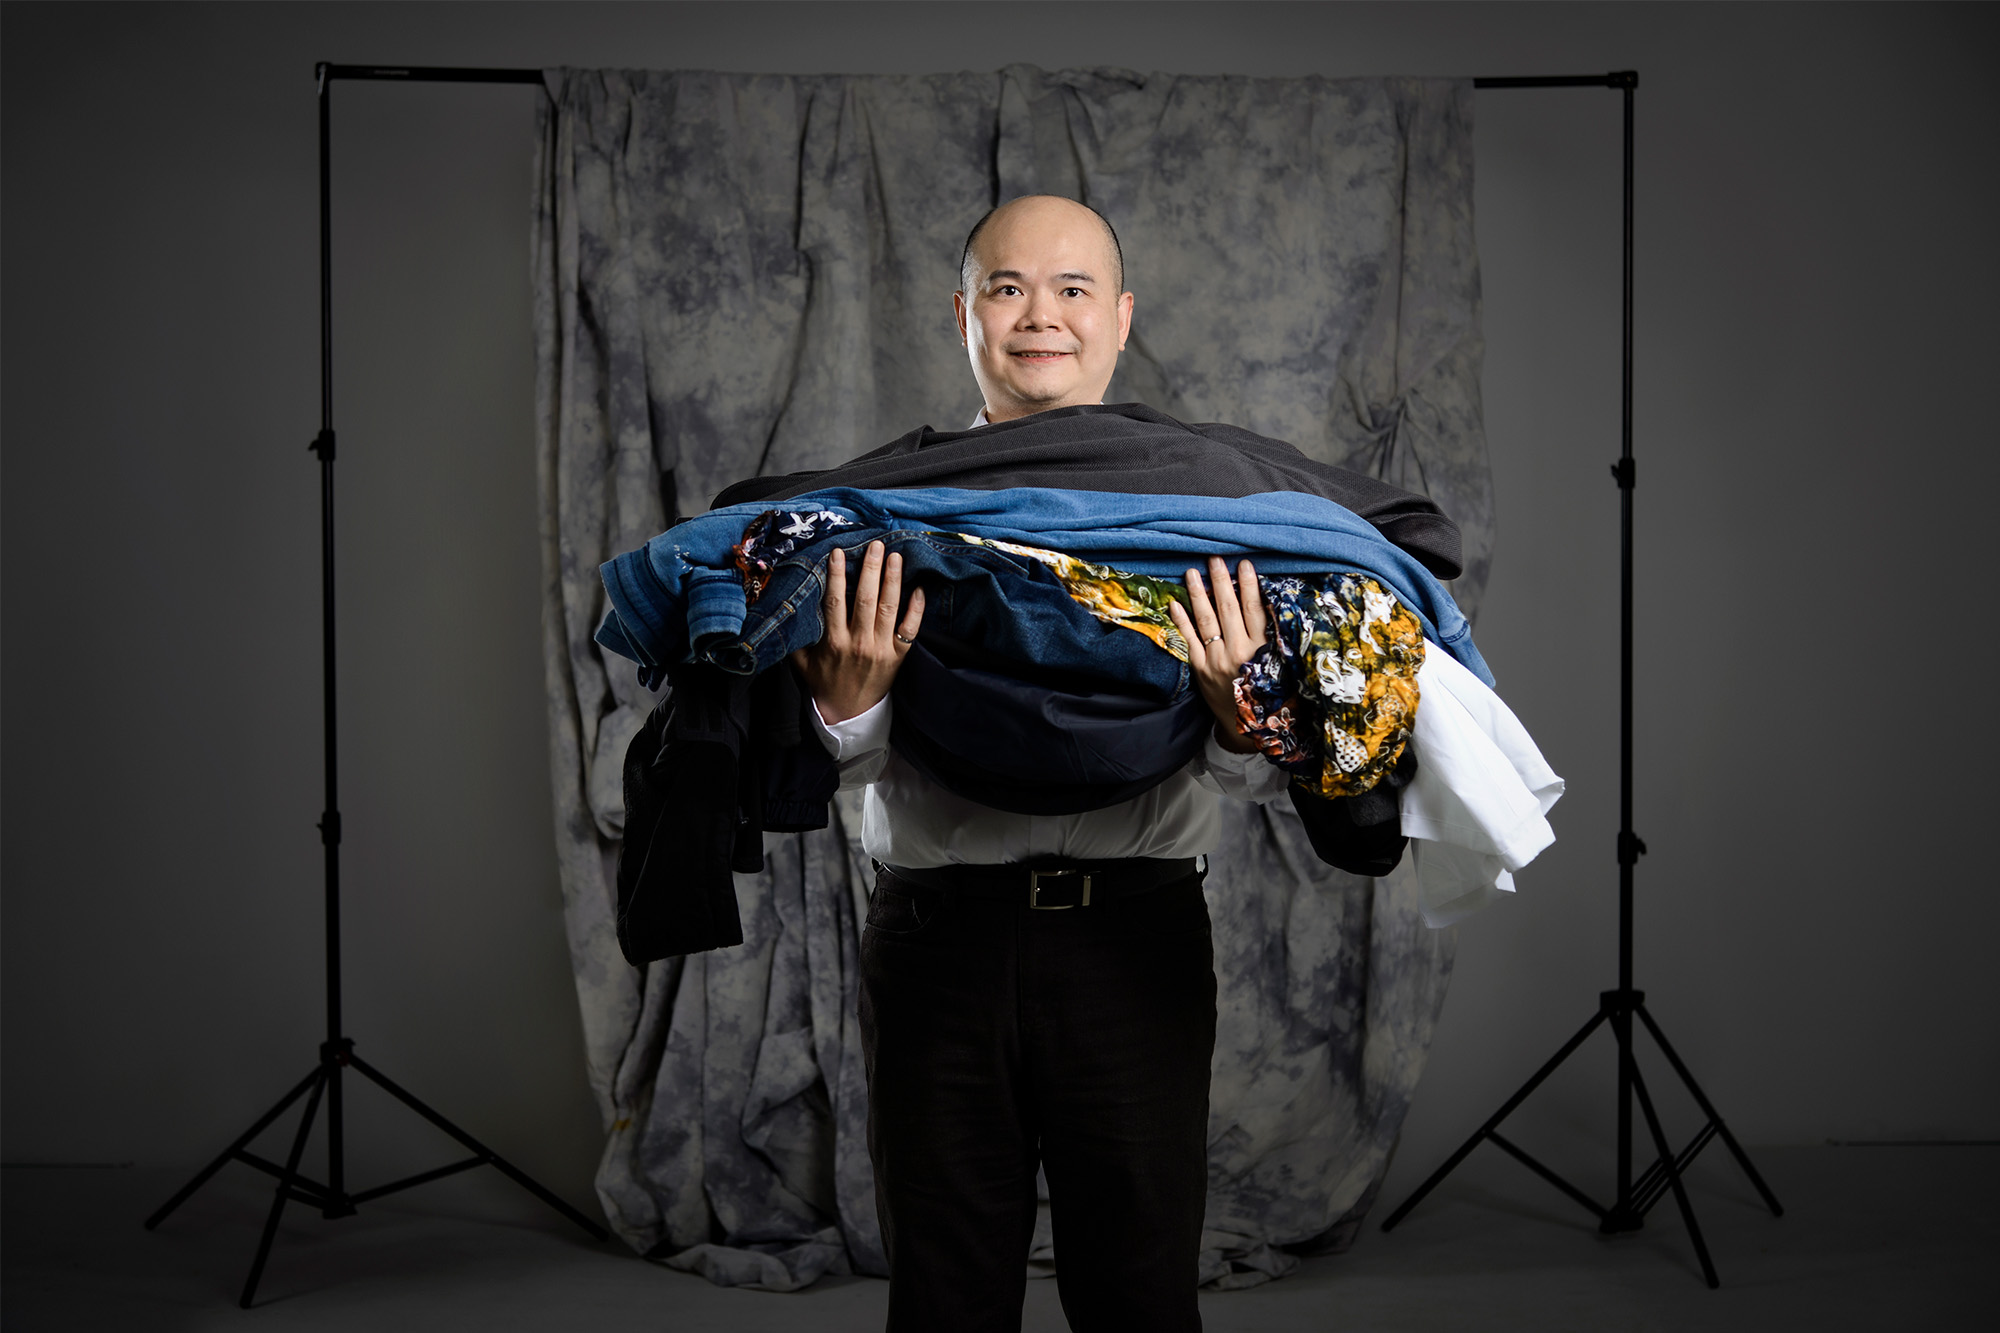 Dr. Kelvin Tsun Wai Ng says better managing clothing and textiles domestically will help support a healthier circular economy. (Photo by Trevor Hopkin)